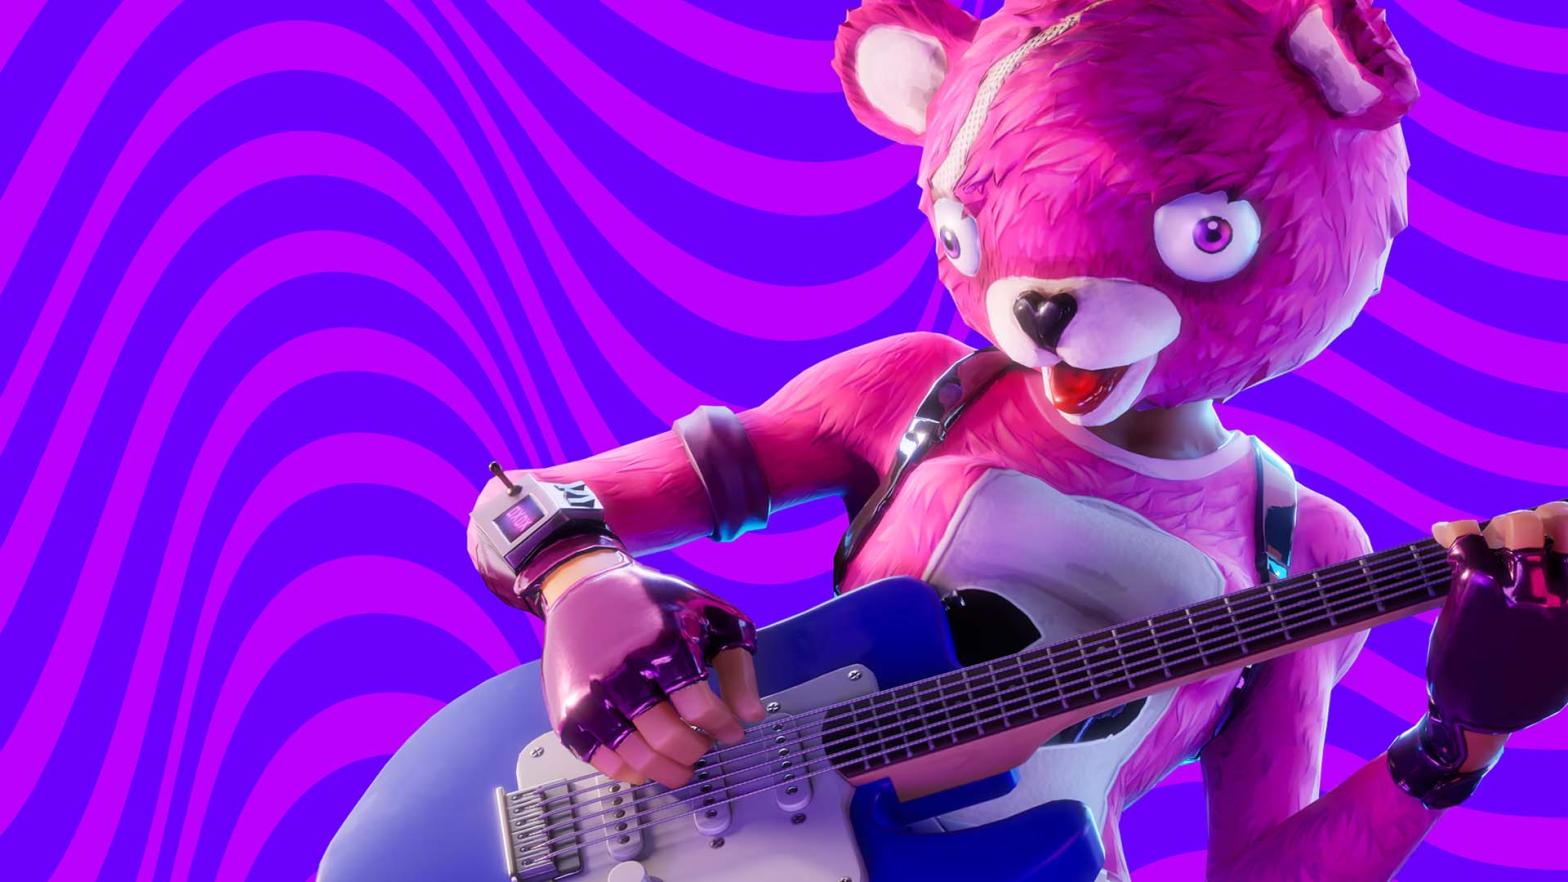 Fortnite Festival’s New Season Adds Rock Band Controller Support (But There’s A Catch)